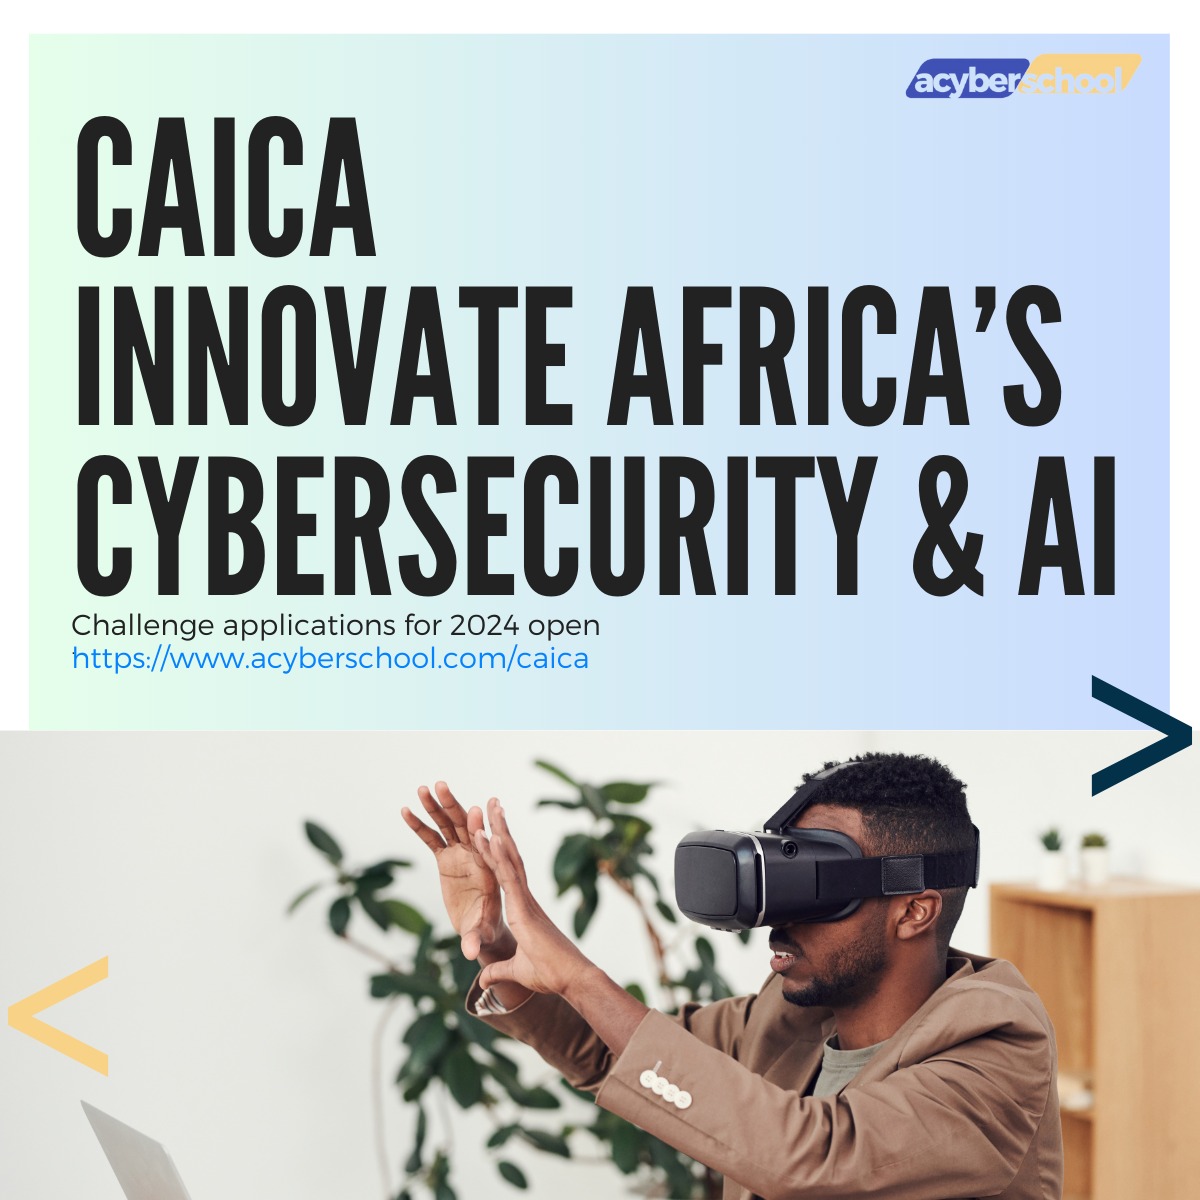 Empowering African innovators! CAICA is dedicated to supporting startups, researchers, and founders in creating solutions that resonate with our unique African context
#AcyberschoolatNADPA
 #DataProtectionKE